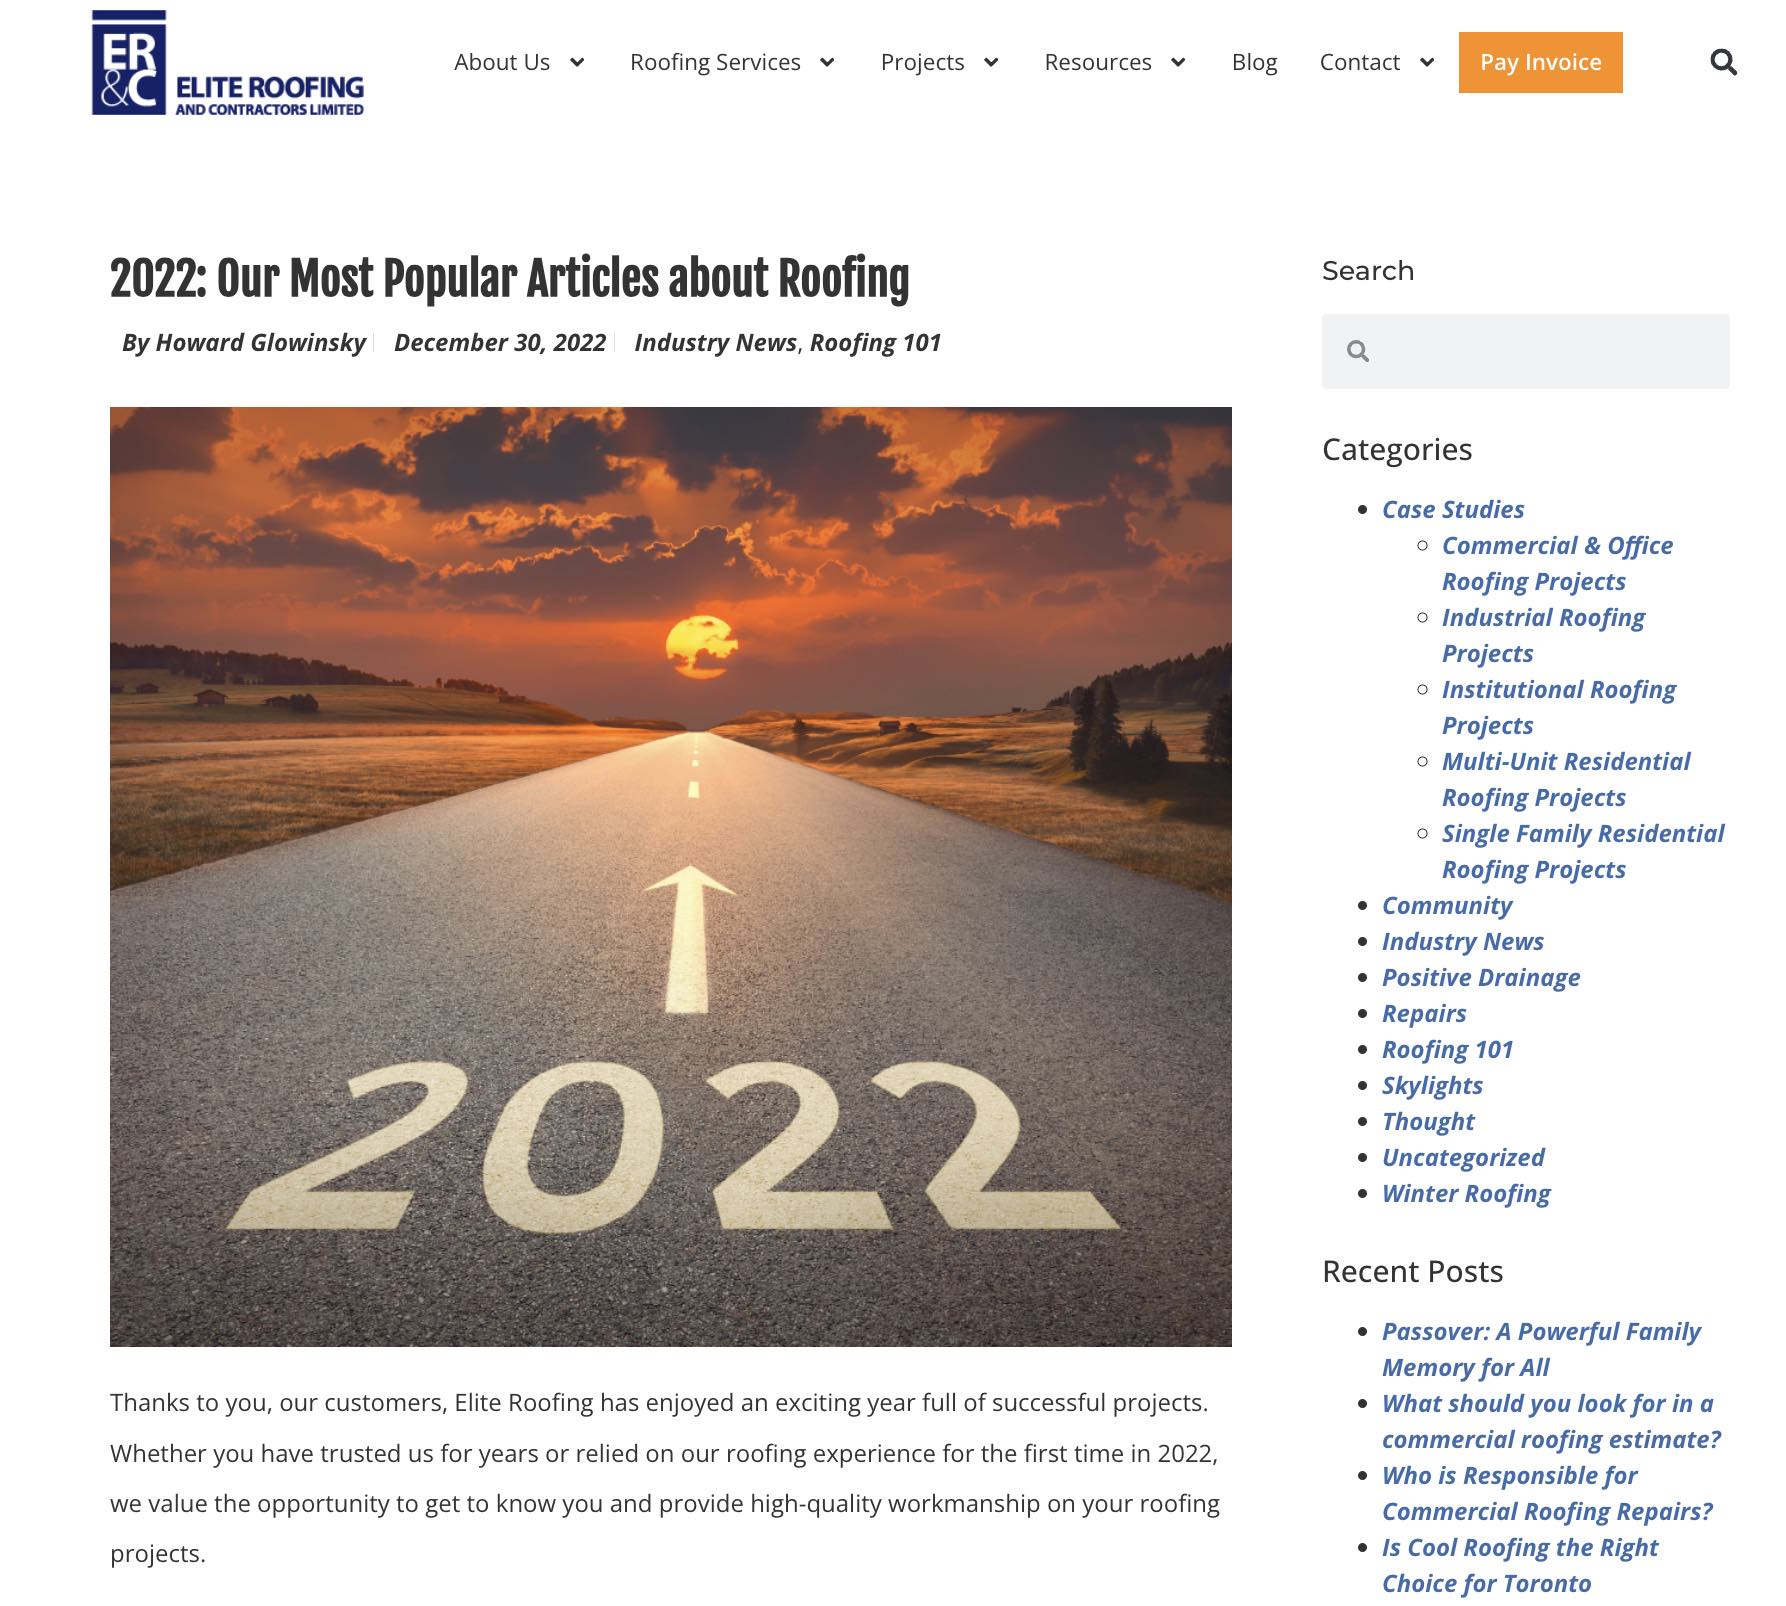 Elite Roofing's Most Popular Articles about Roofing in 2022.